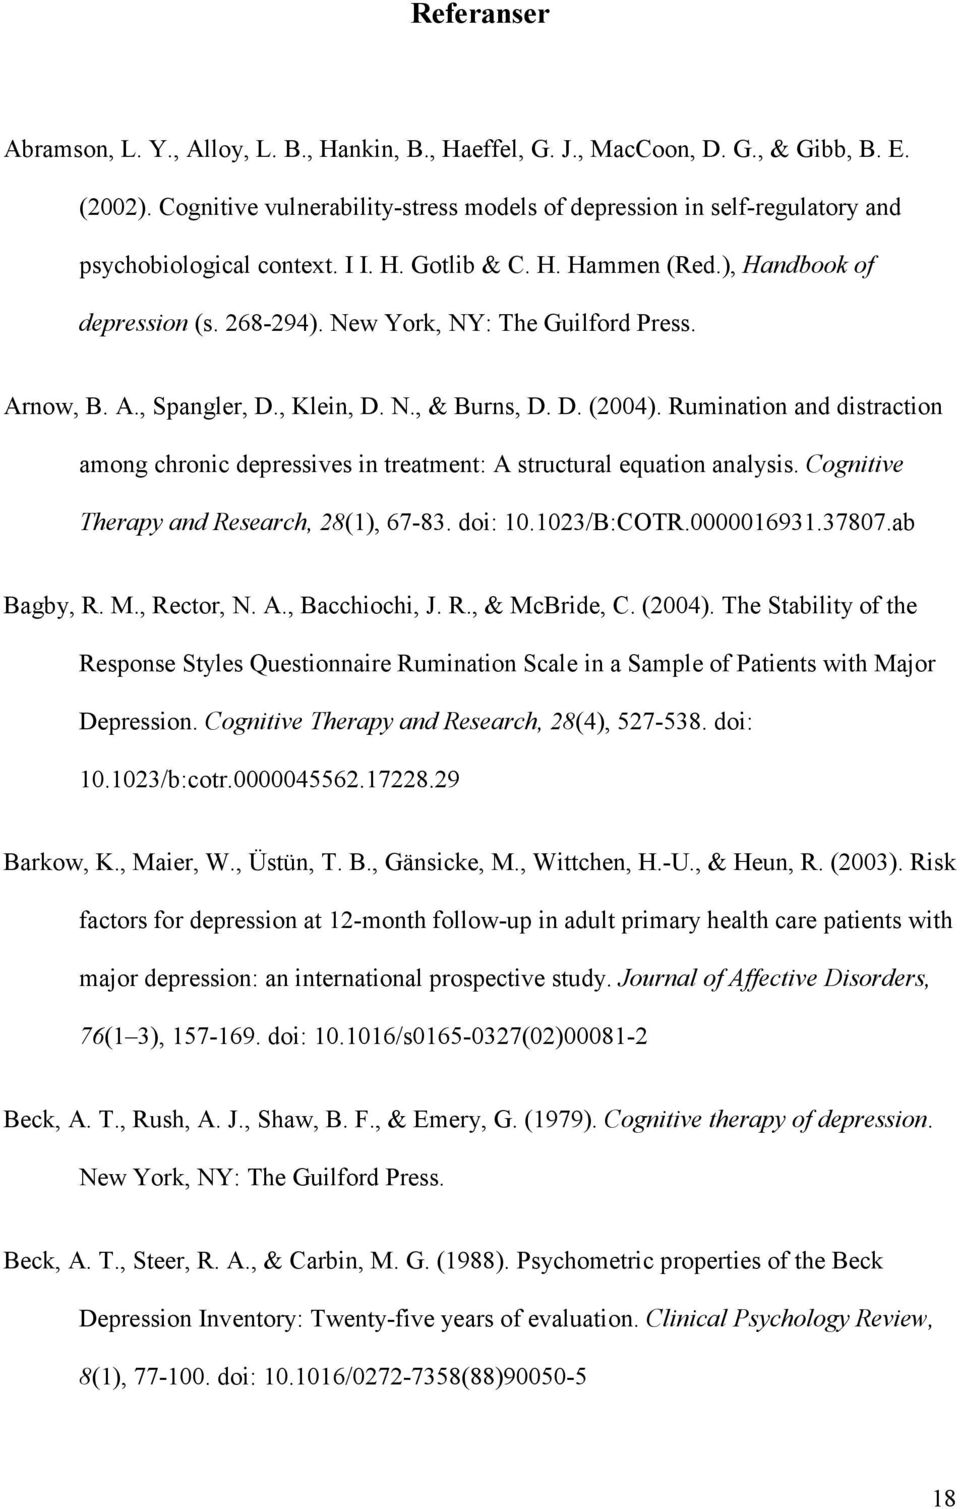 New York, NY: The Guilford Press. Arnow, B. A., Spangler, D., Klein, D. N., & Burns, D. D. (2004). Rumination and distraction among chronic depressives in treatment: A structural equation analysis.